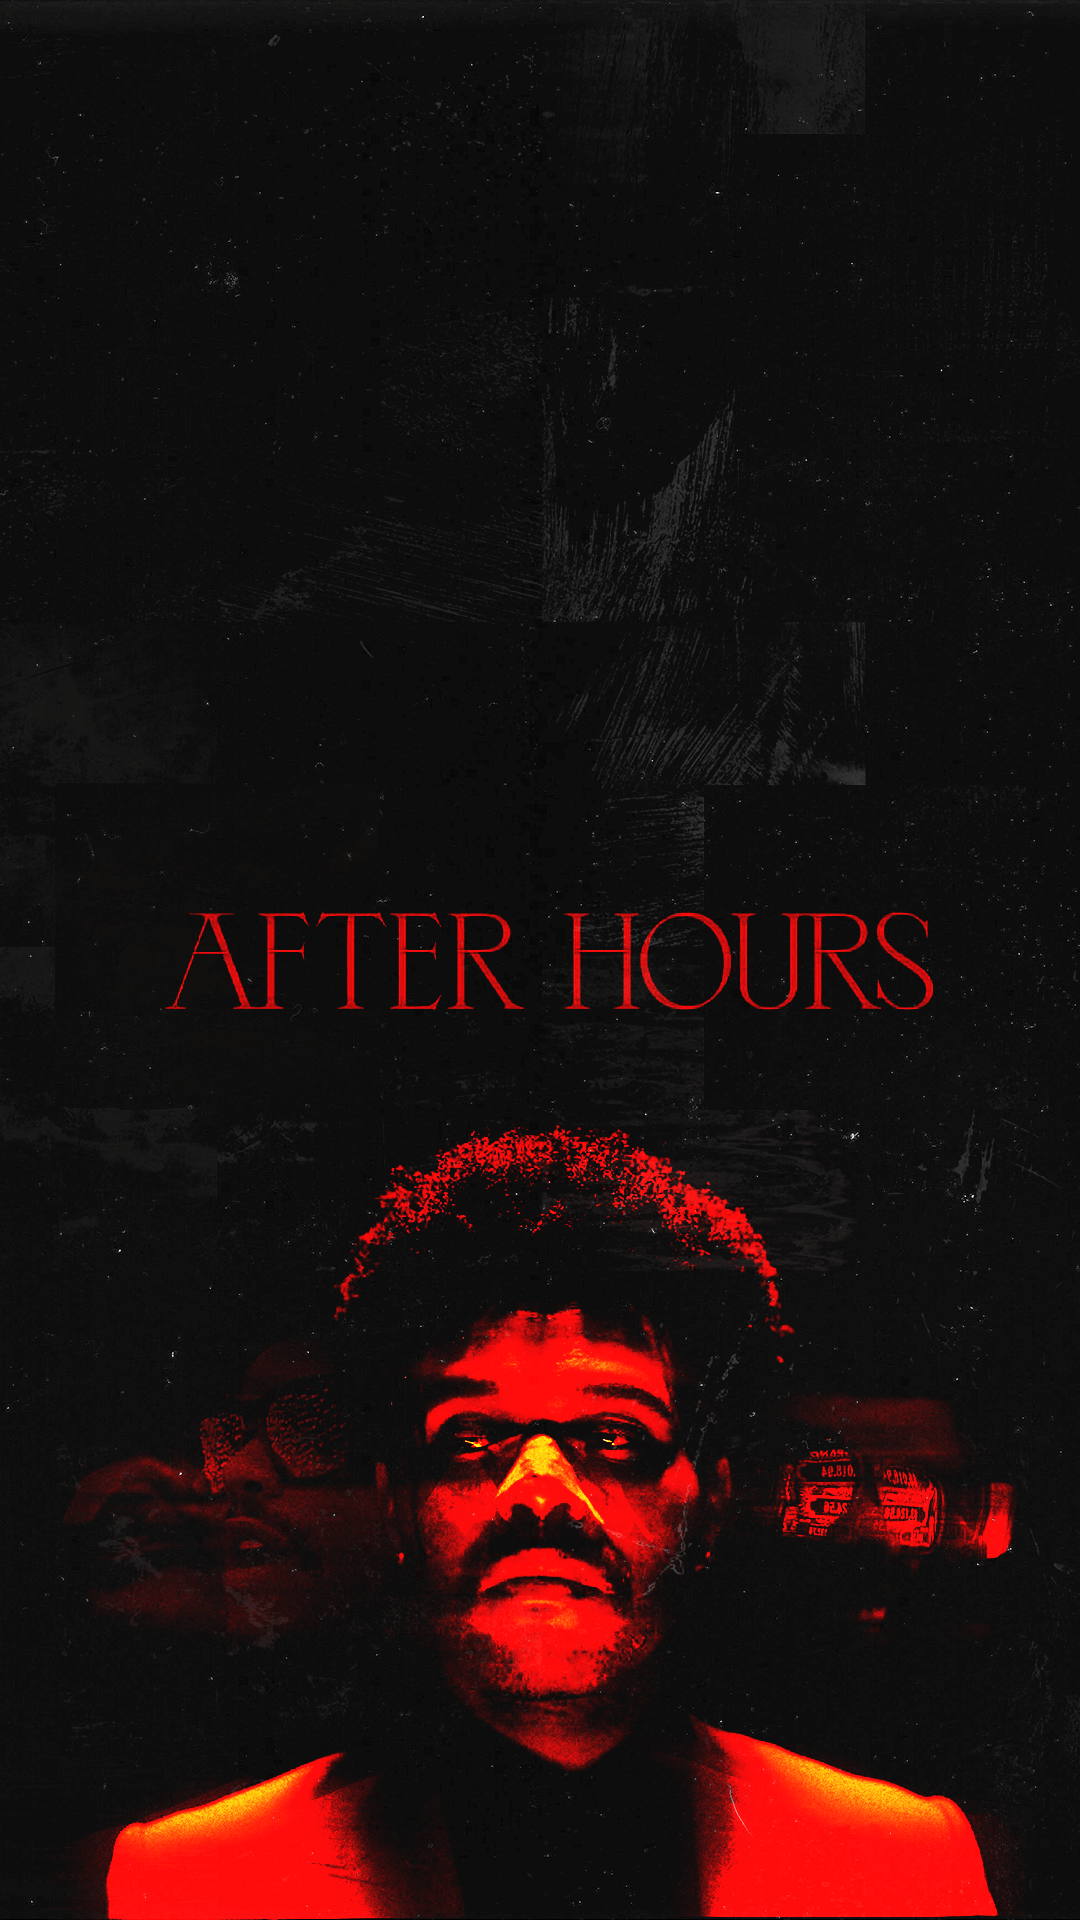 The Weeknd After Hours wallpaper I made for my phone - The Weeknd